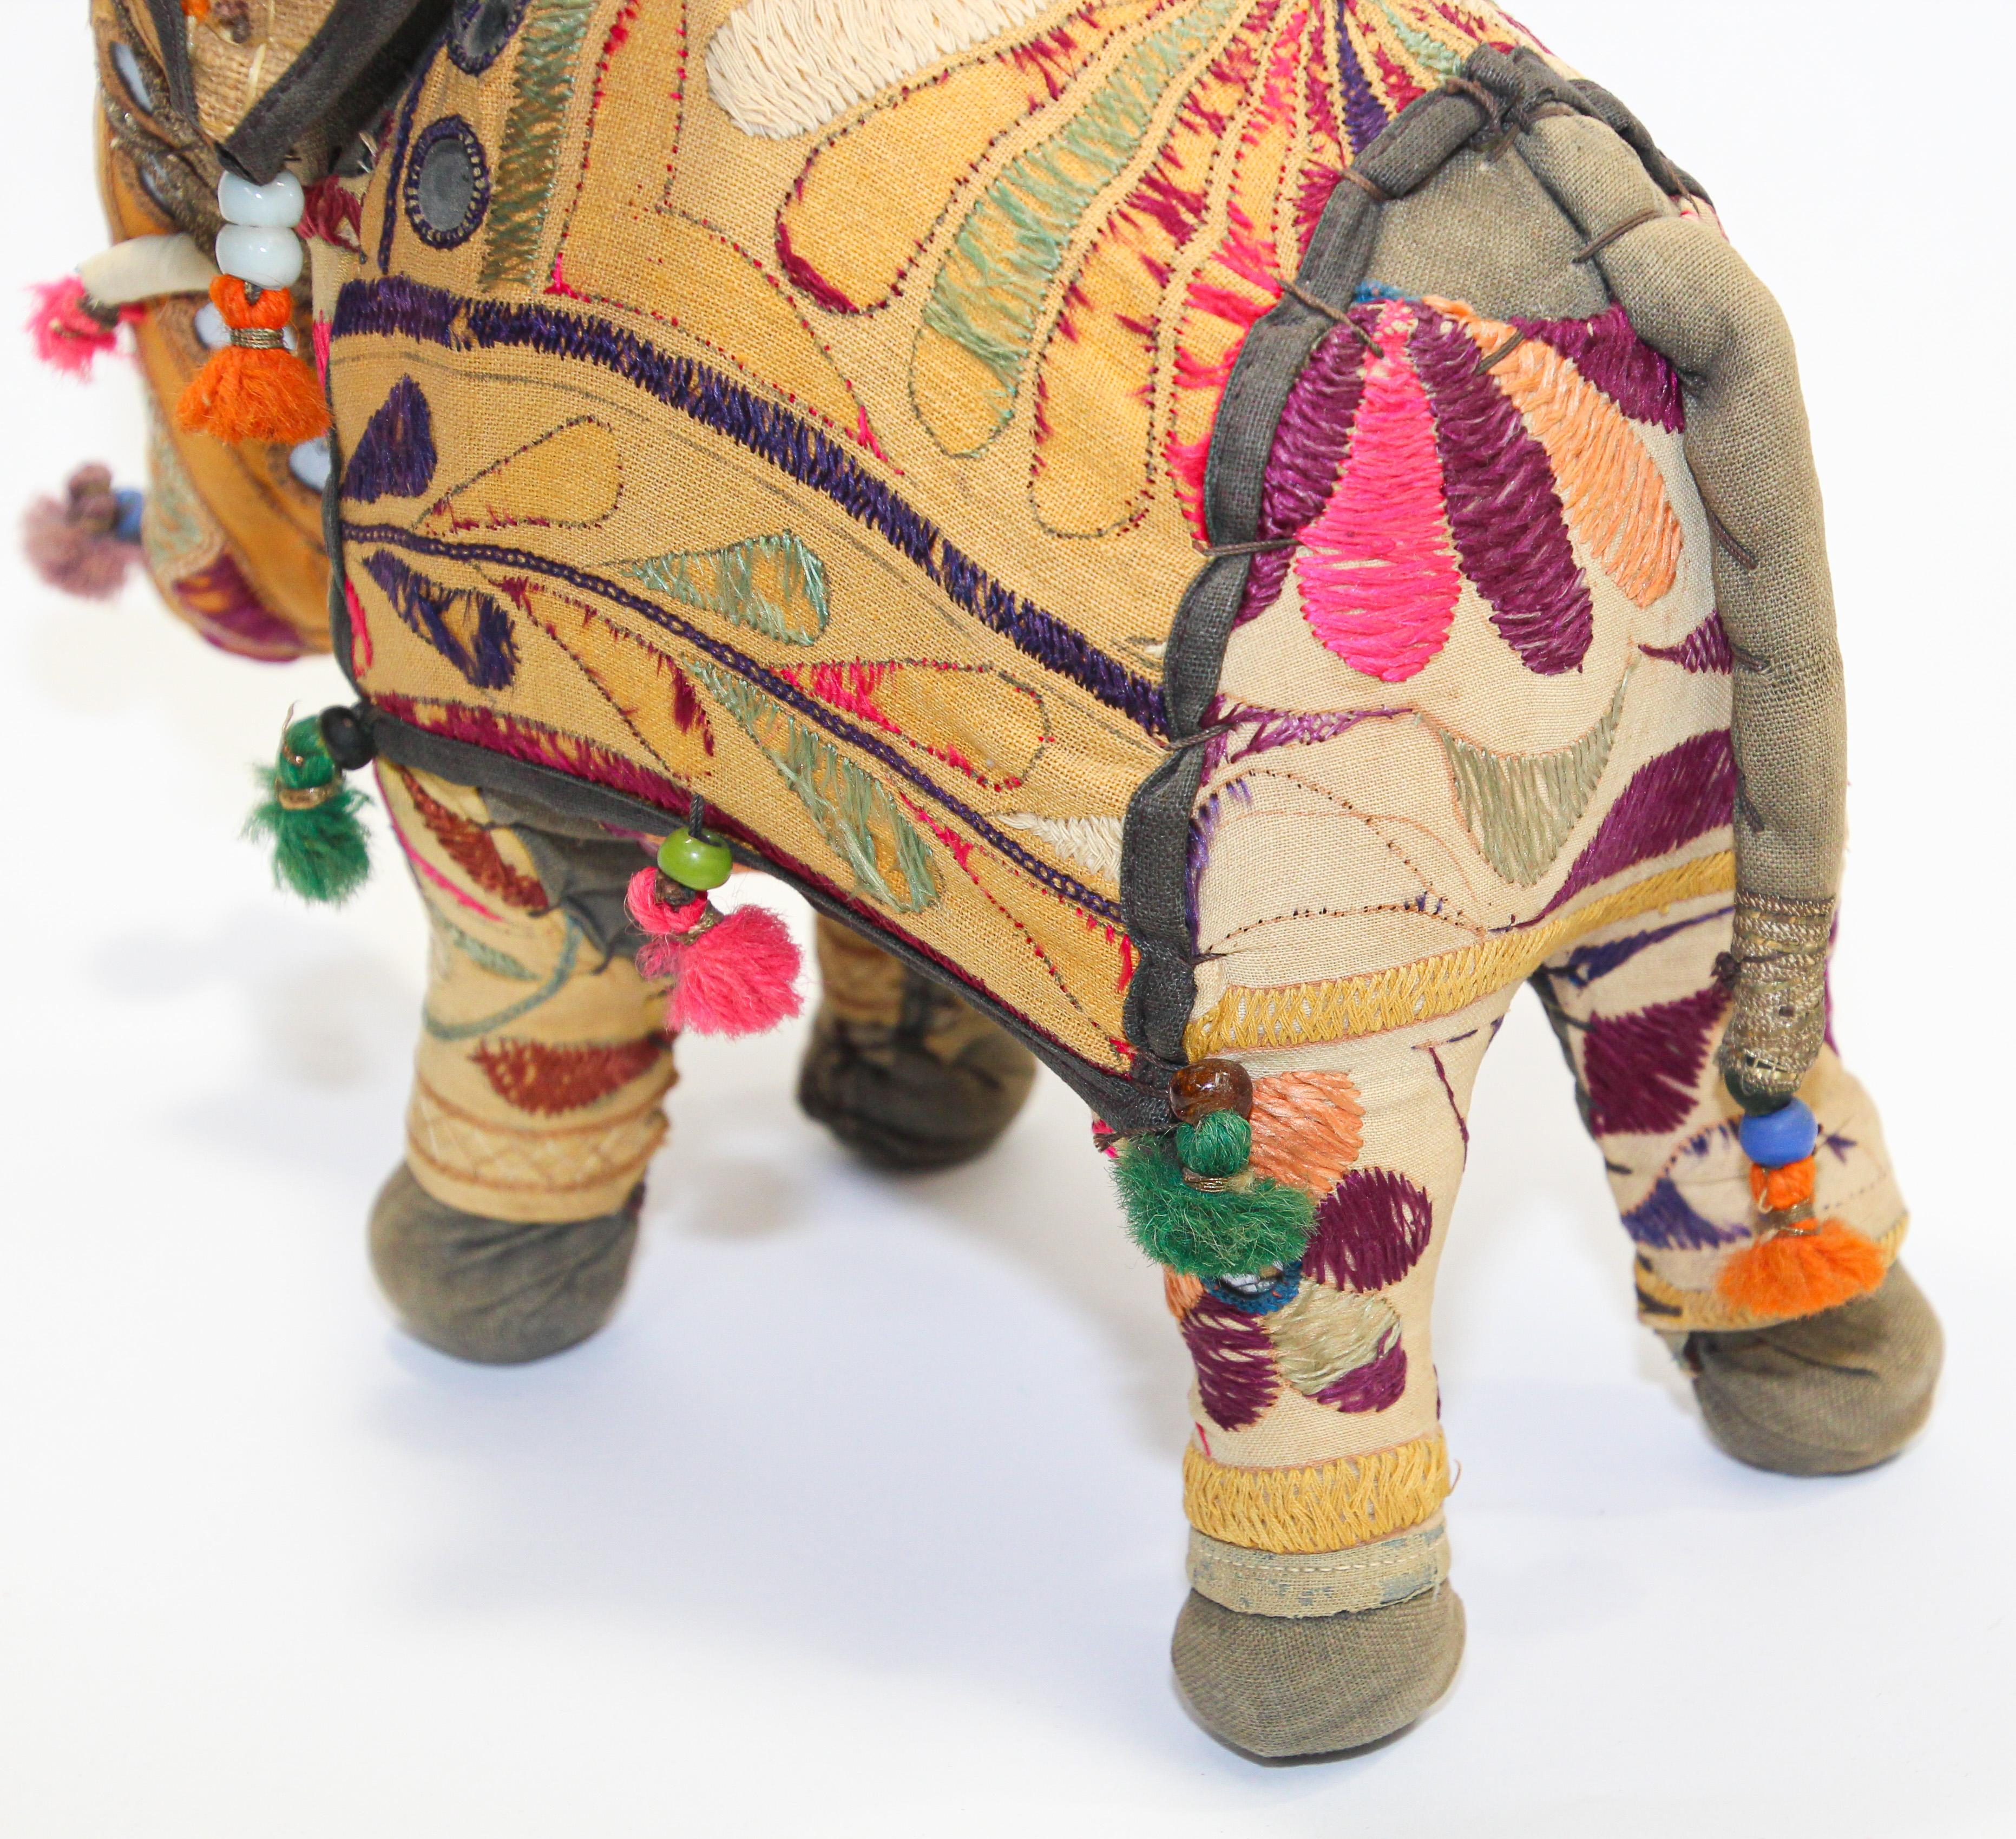 Anglo Raj Vintage Hand-Crafted Stuffed Cotton Embroidered Elephant, India, 1950 For Sale 1